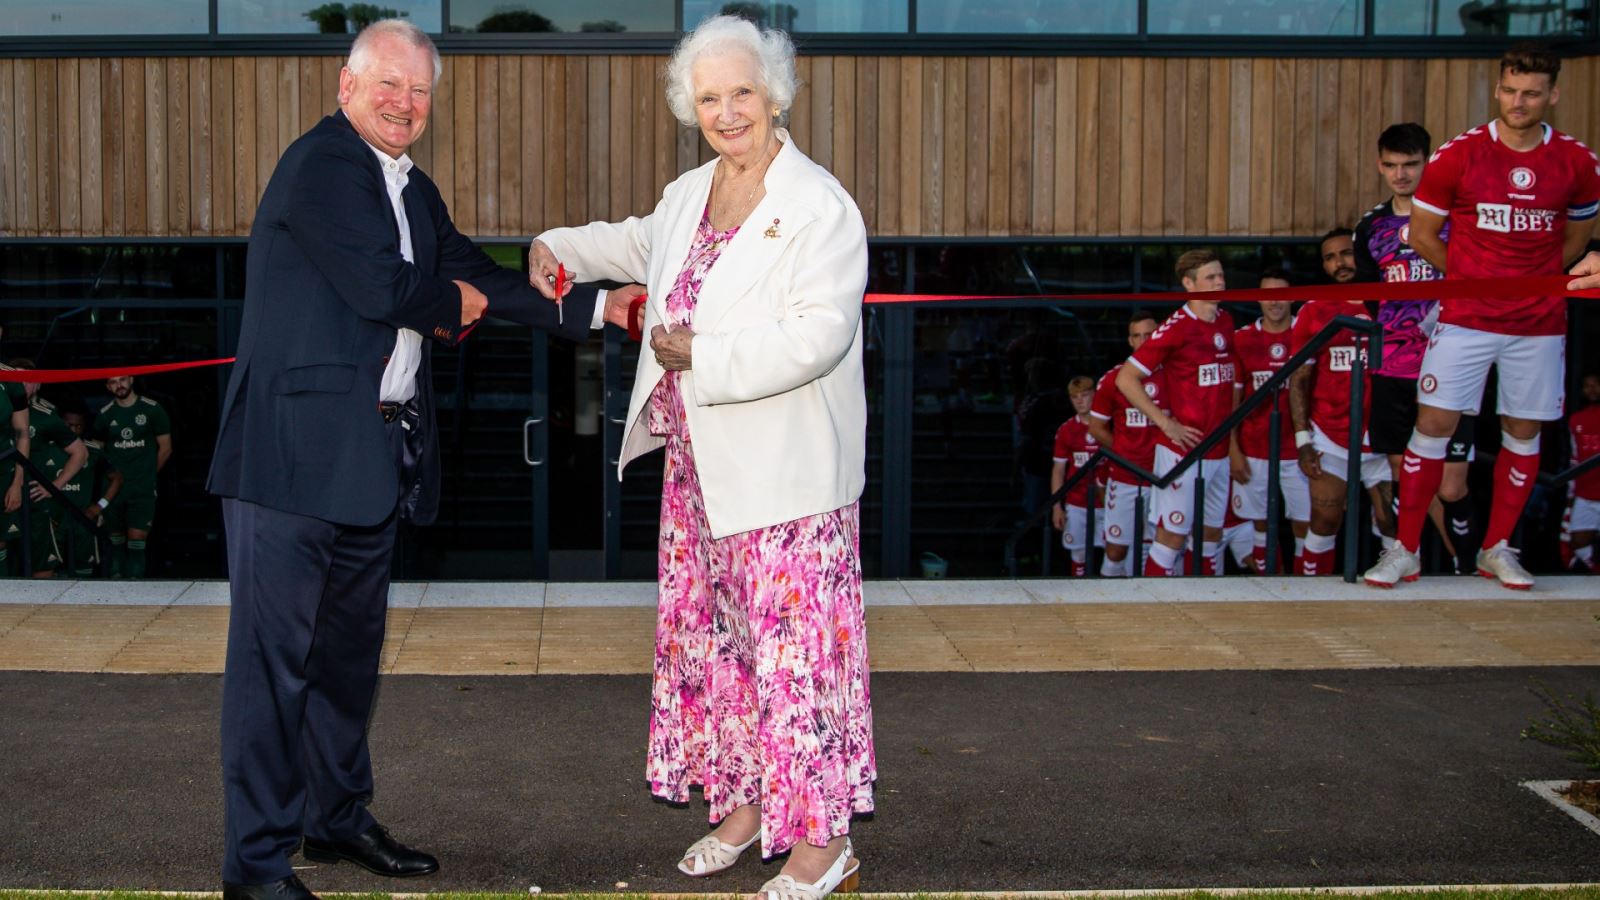 Steve Lansdown and Marina Dolman open the Robins High Performance Centre